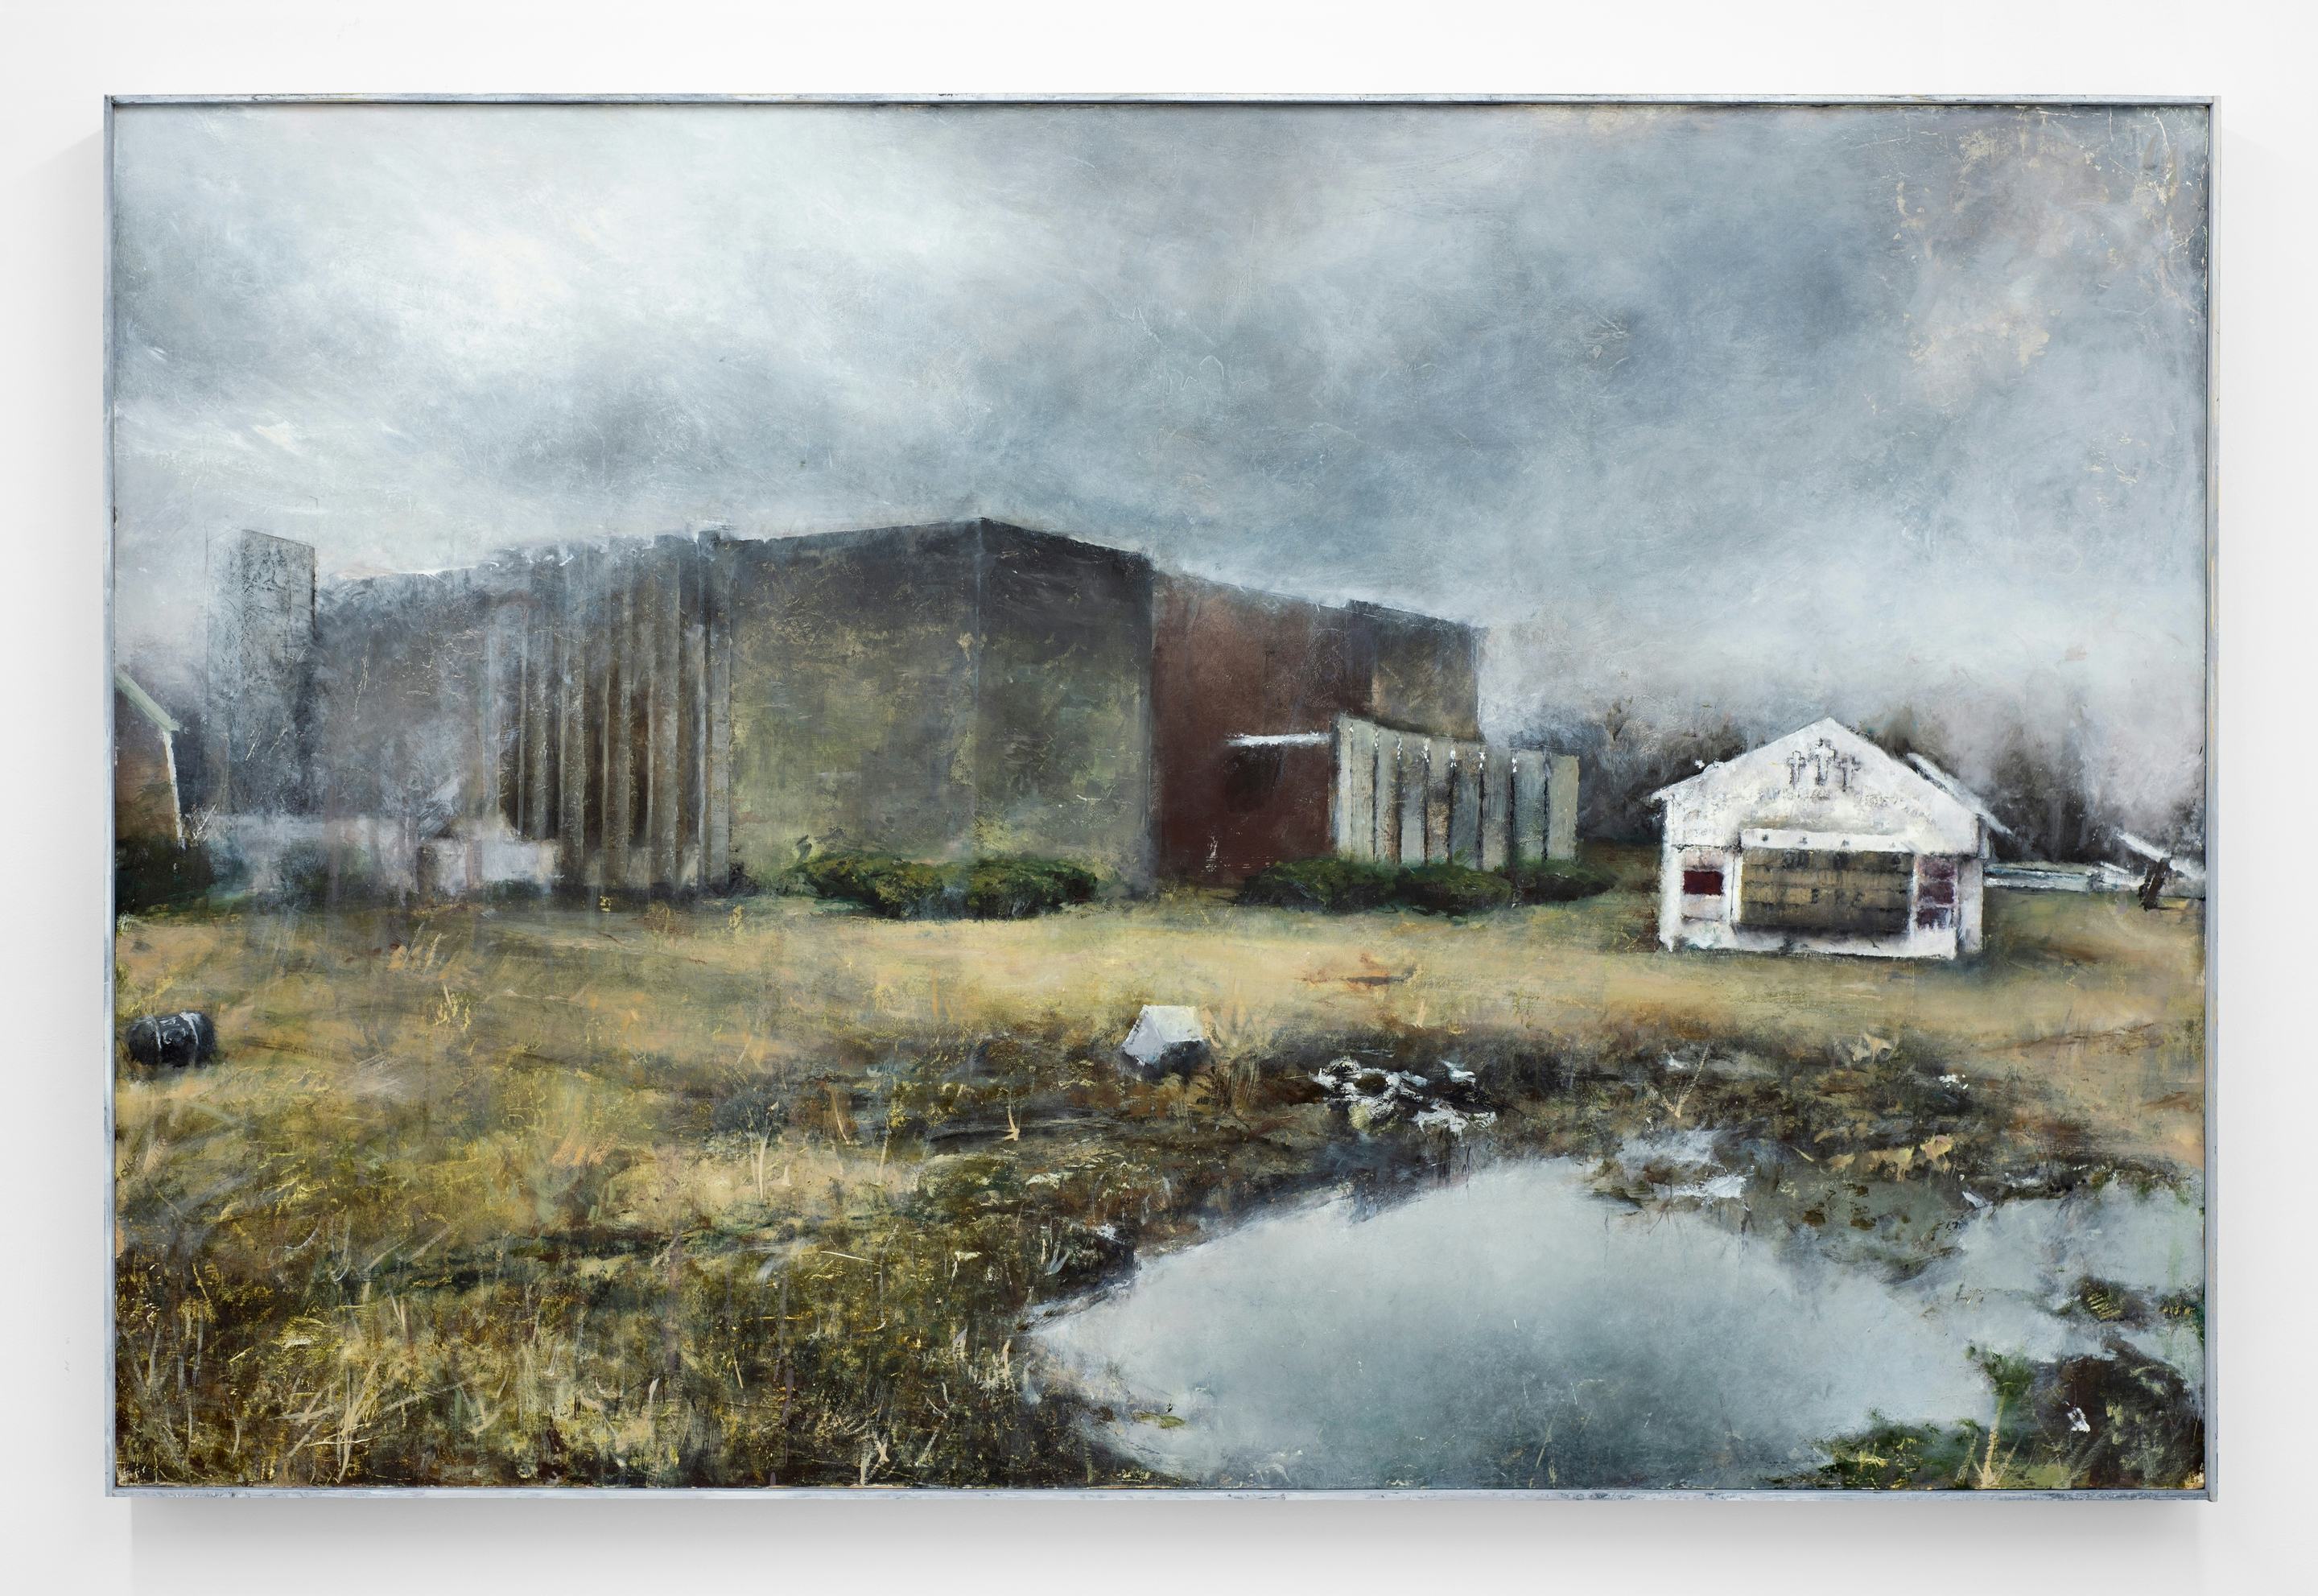 Church Landscape (2022)
Oil on panel with artist's frame
40.25h x 60.5w x 2.75d inches (102.235h x 153.67w x 6.985d cm)